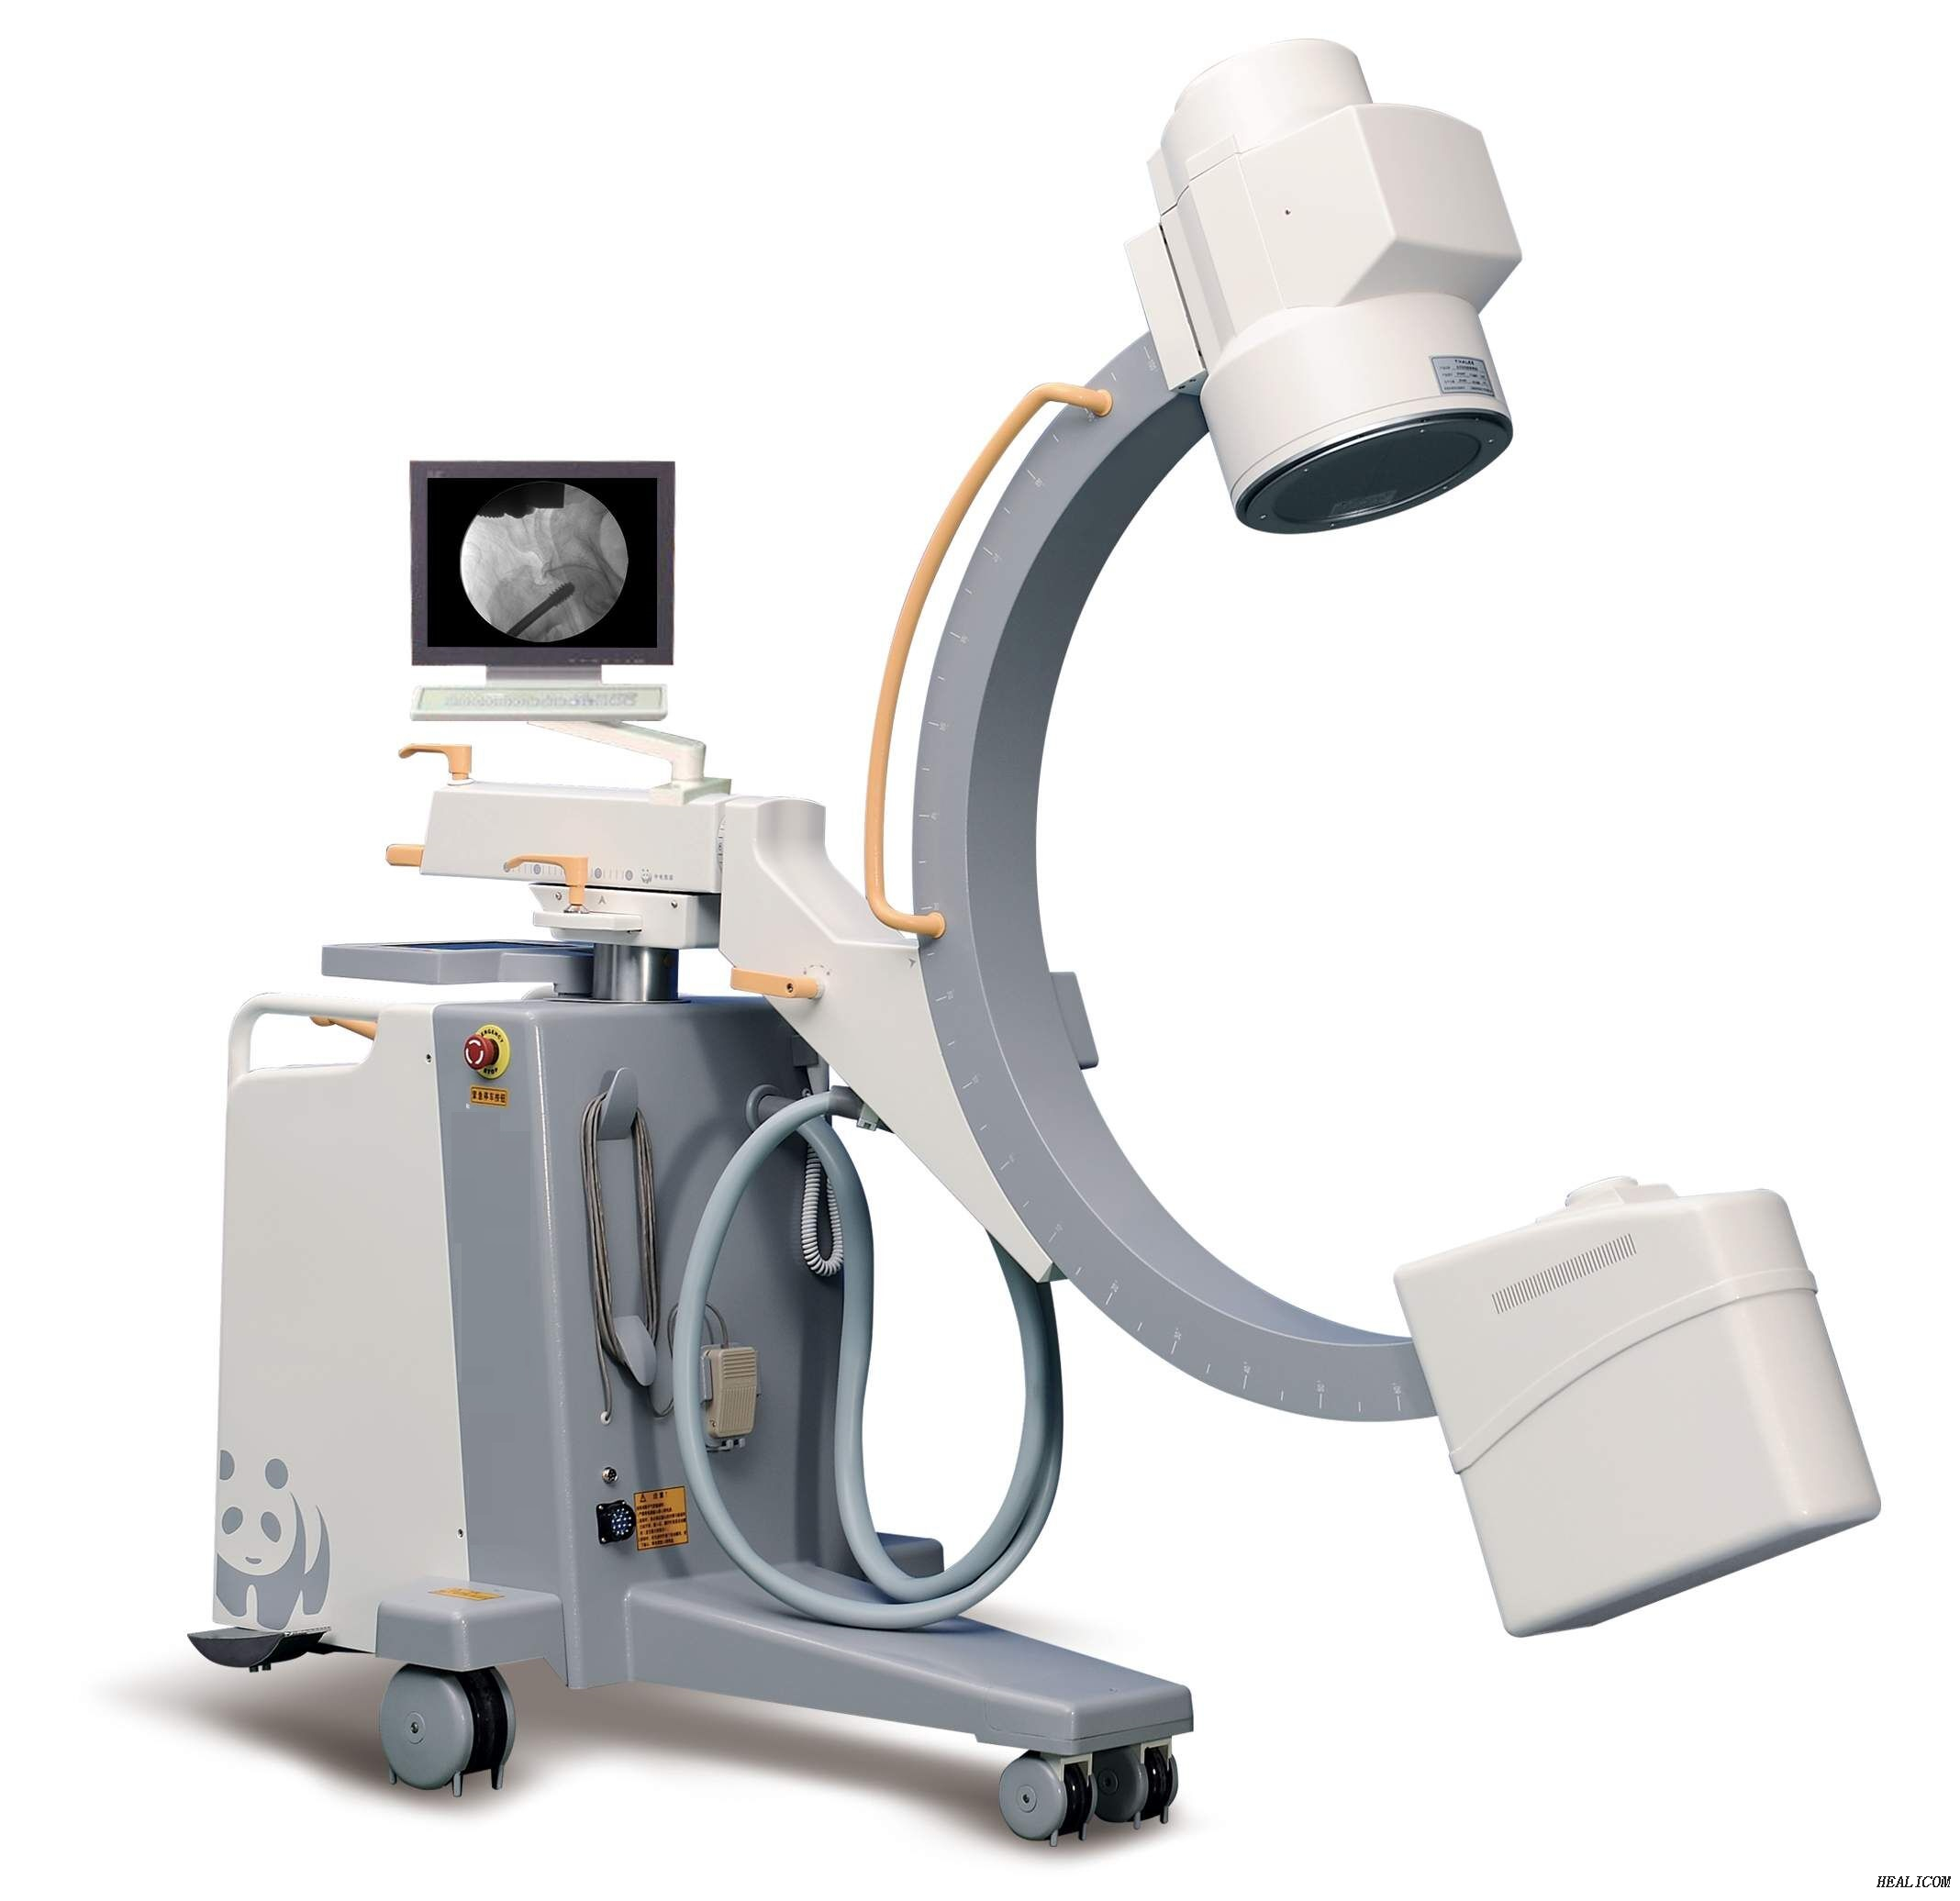 HCA-20C Factory Price Medical Hospital High Frequency Mobile Digital C Ram X-ray Machine C-Arm Radiography Imaging System